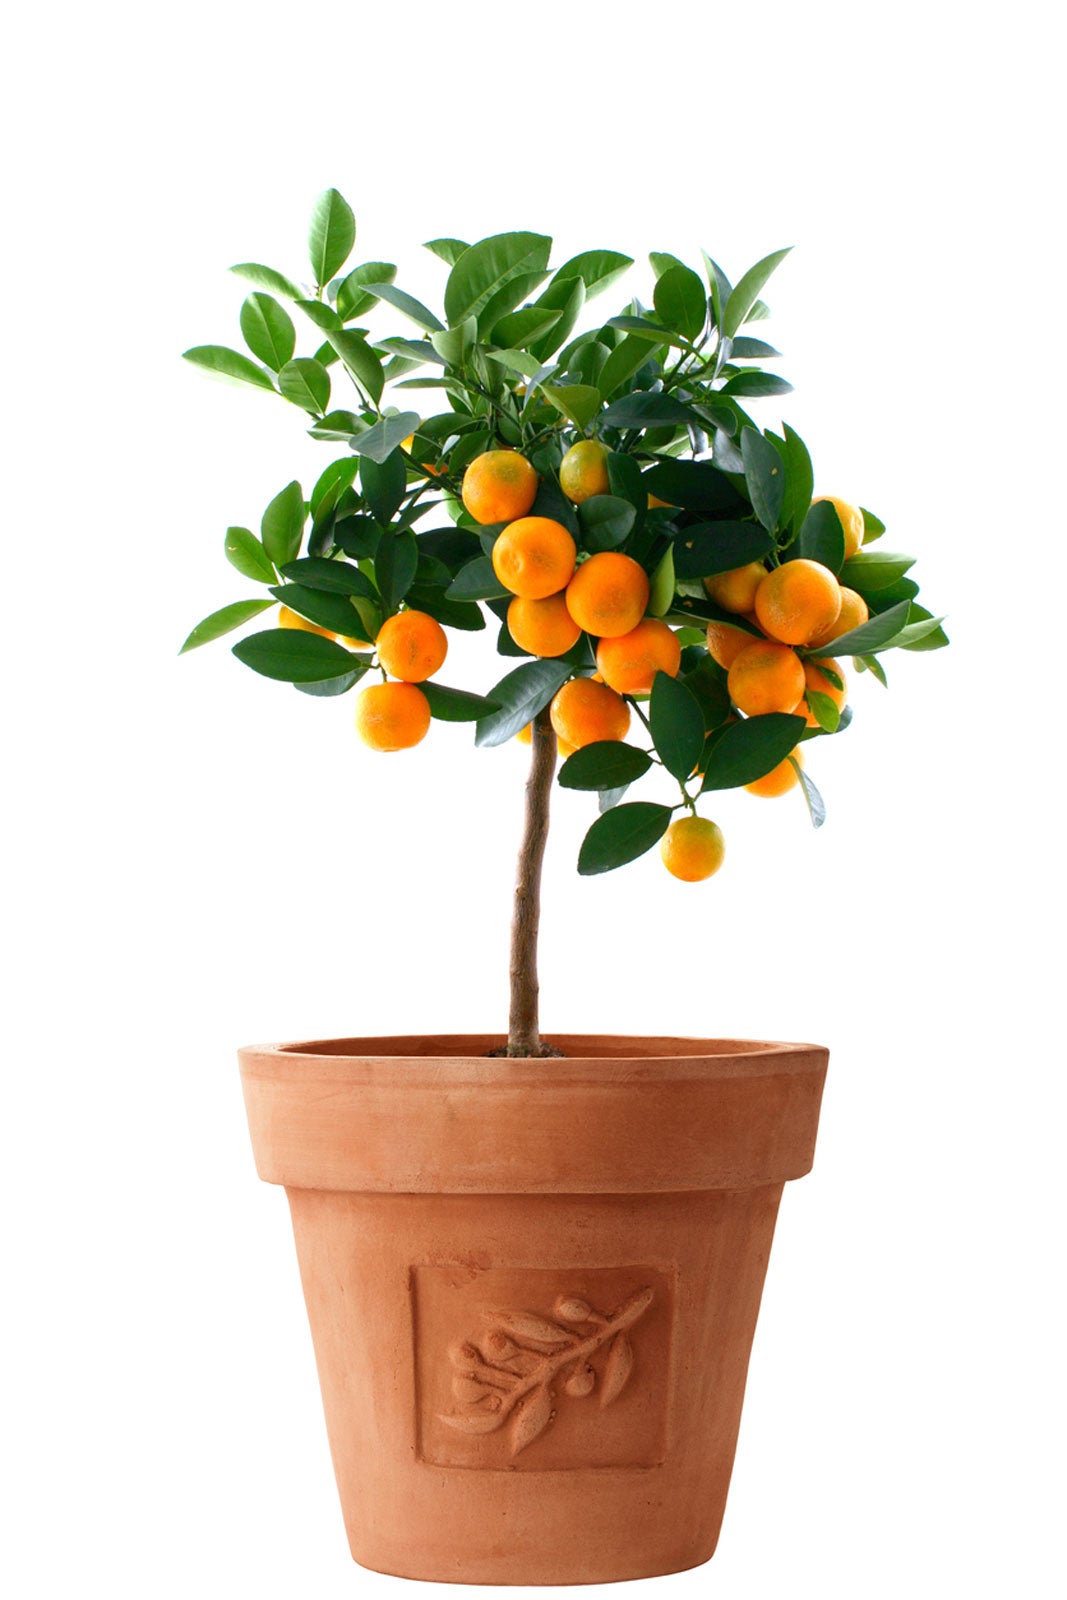 Growing Oranges at Home